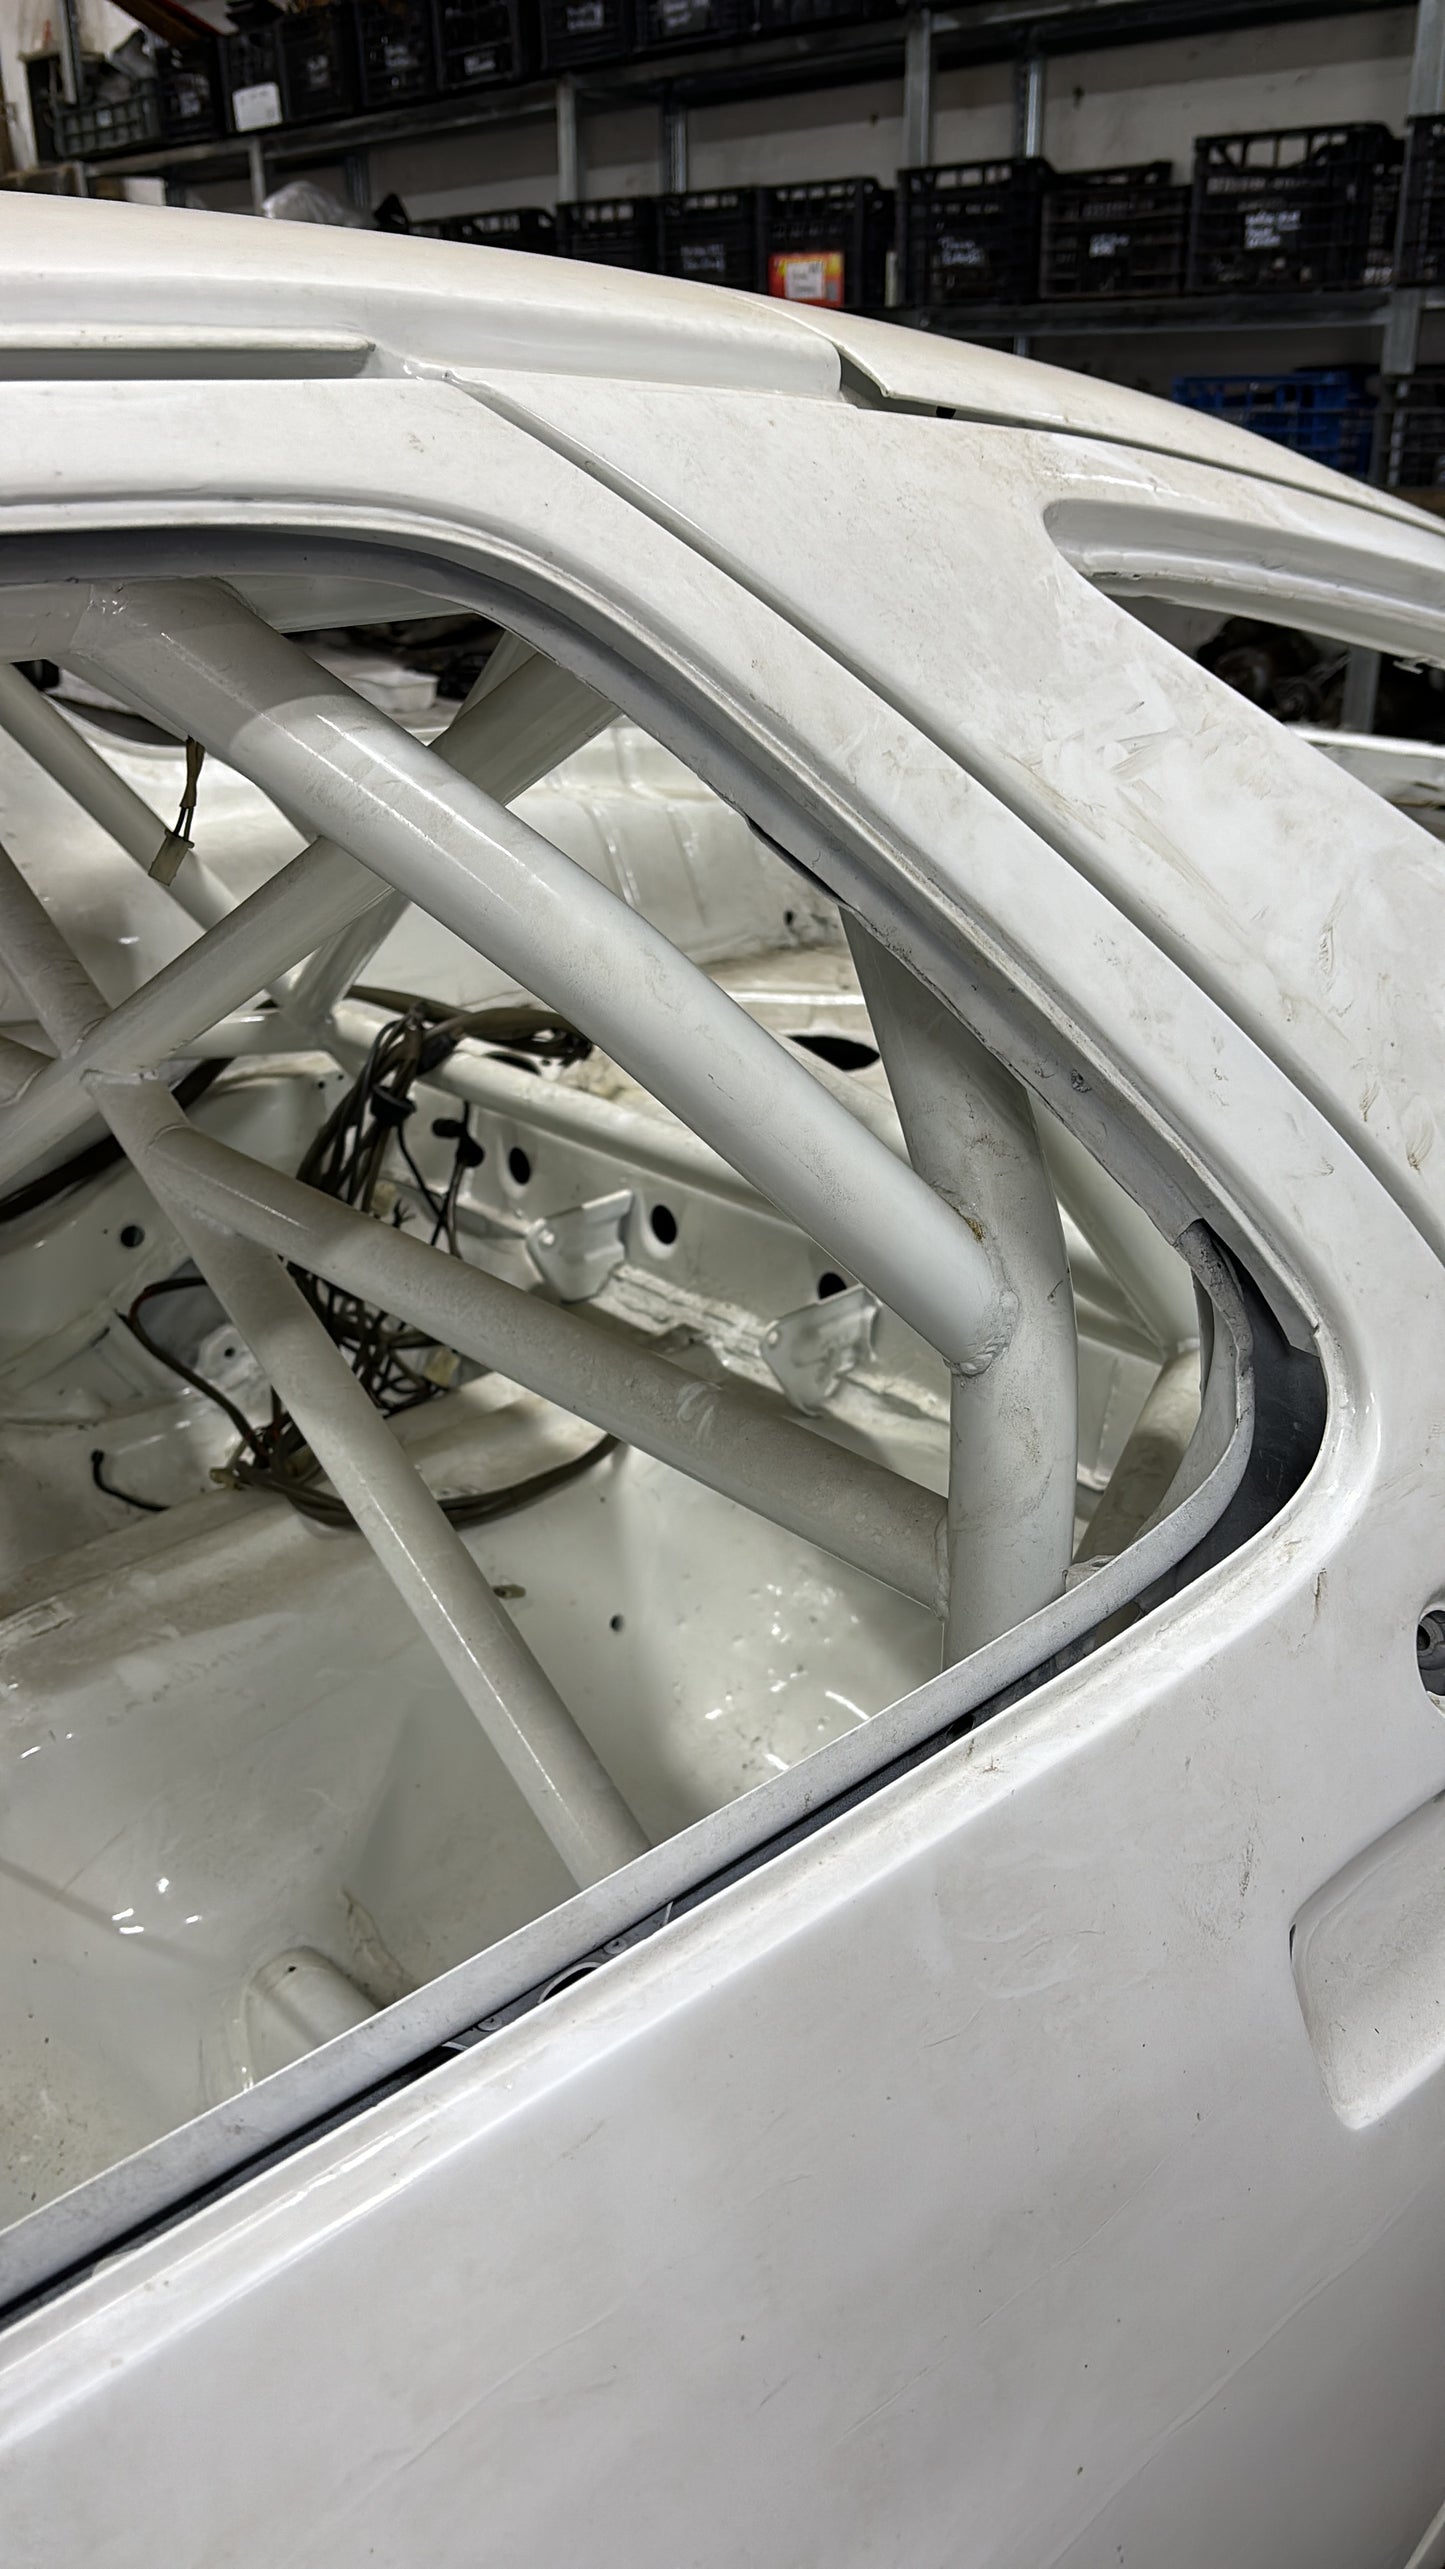 Porsche 928 race car, track car chassis with roll cage